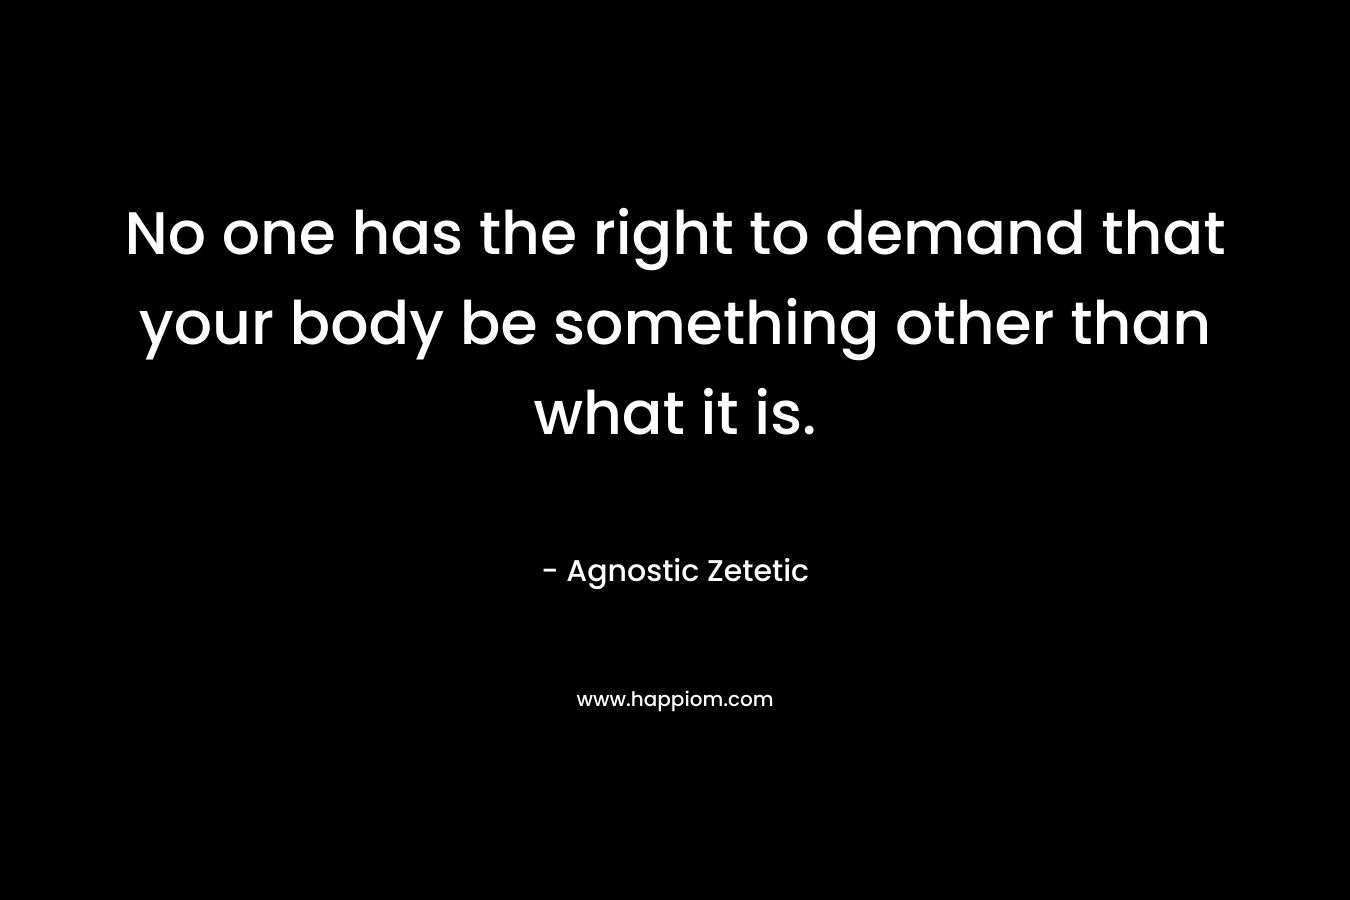 No one has the right to demand that your body be something other than what it is. – Agnostic Zetetic